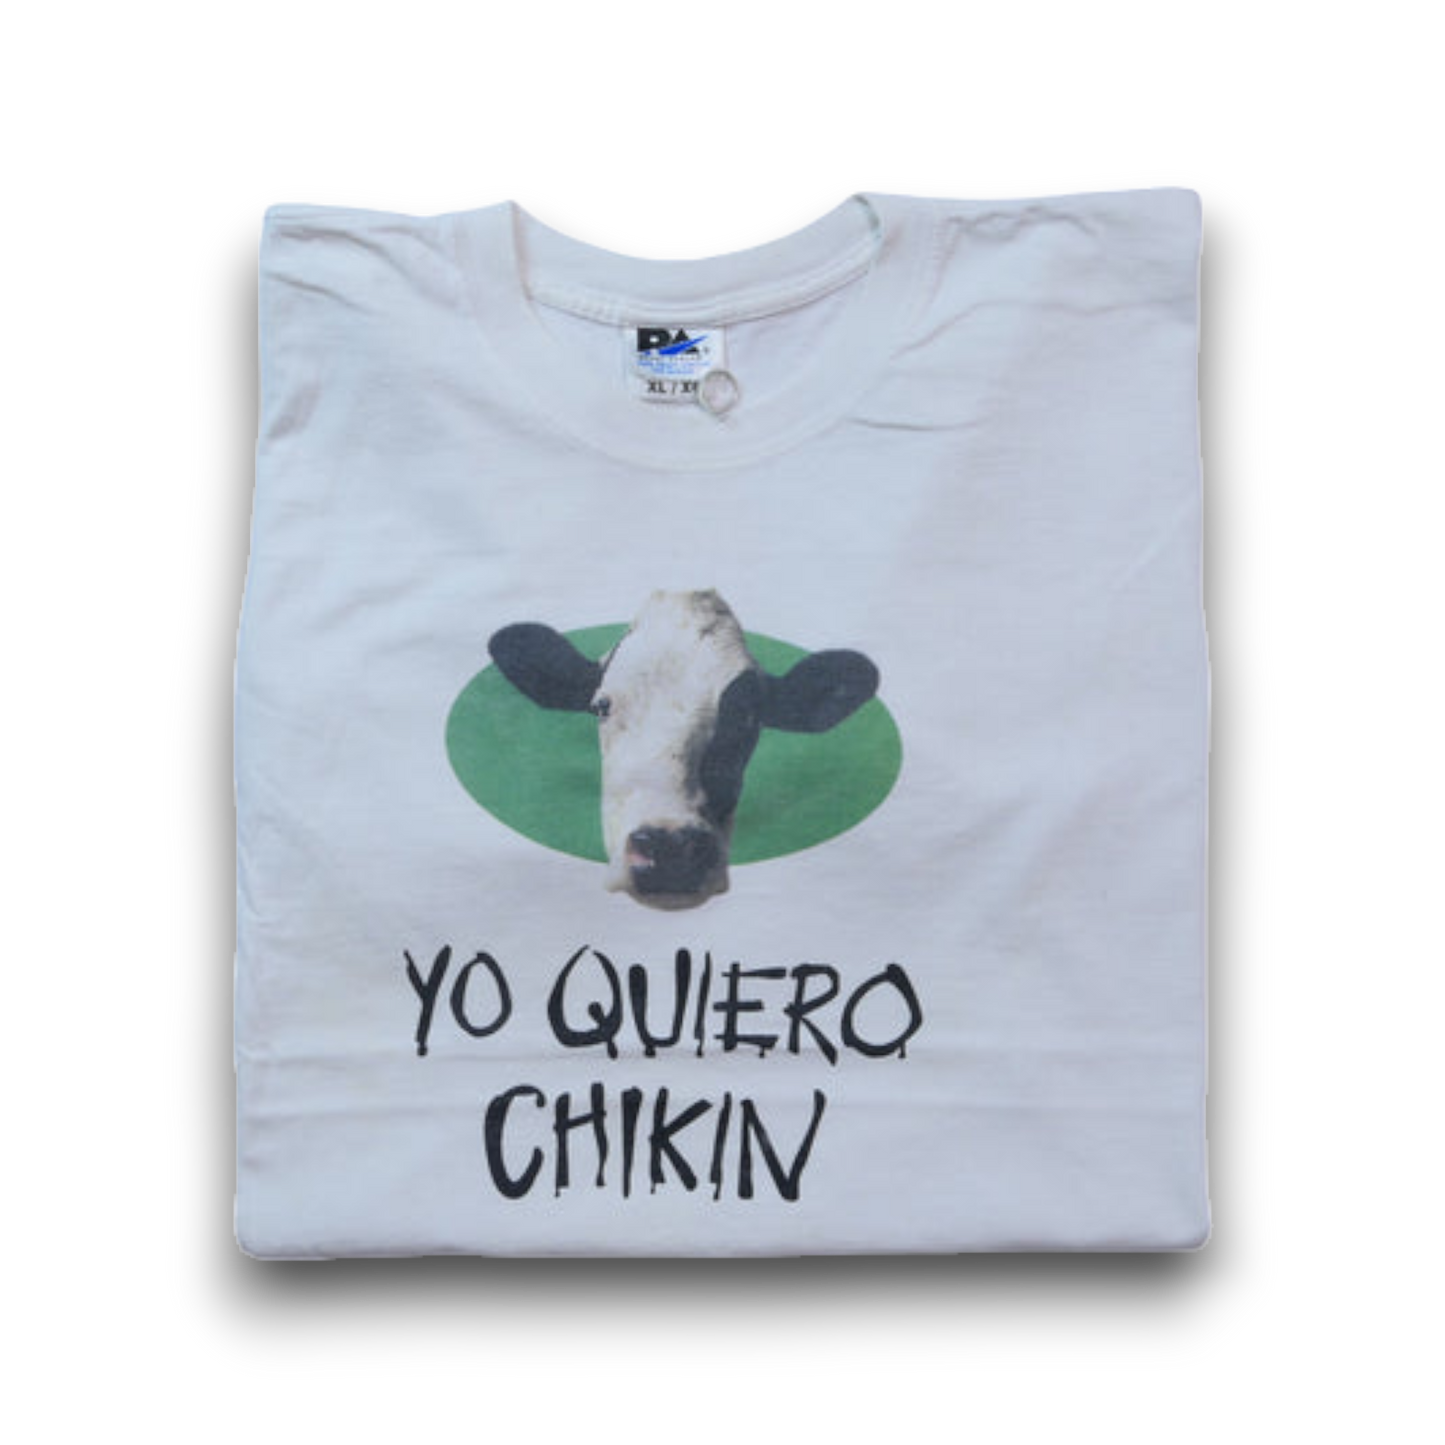 VINTAGE 90-00s XL Promotion Tee -Chick-fil-A-